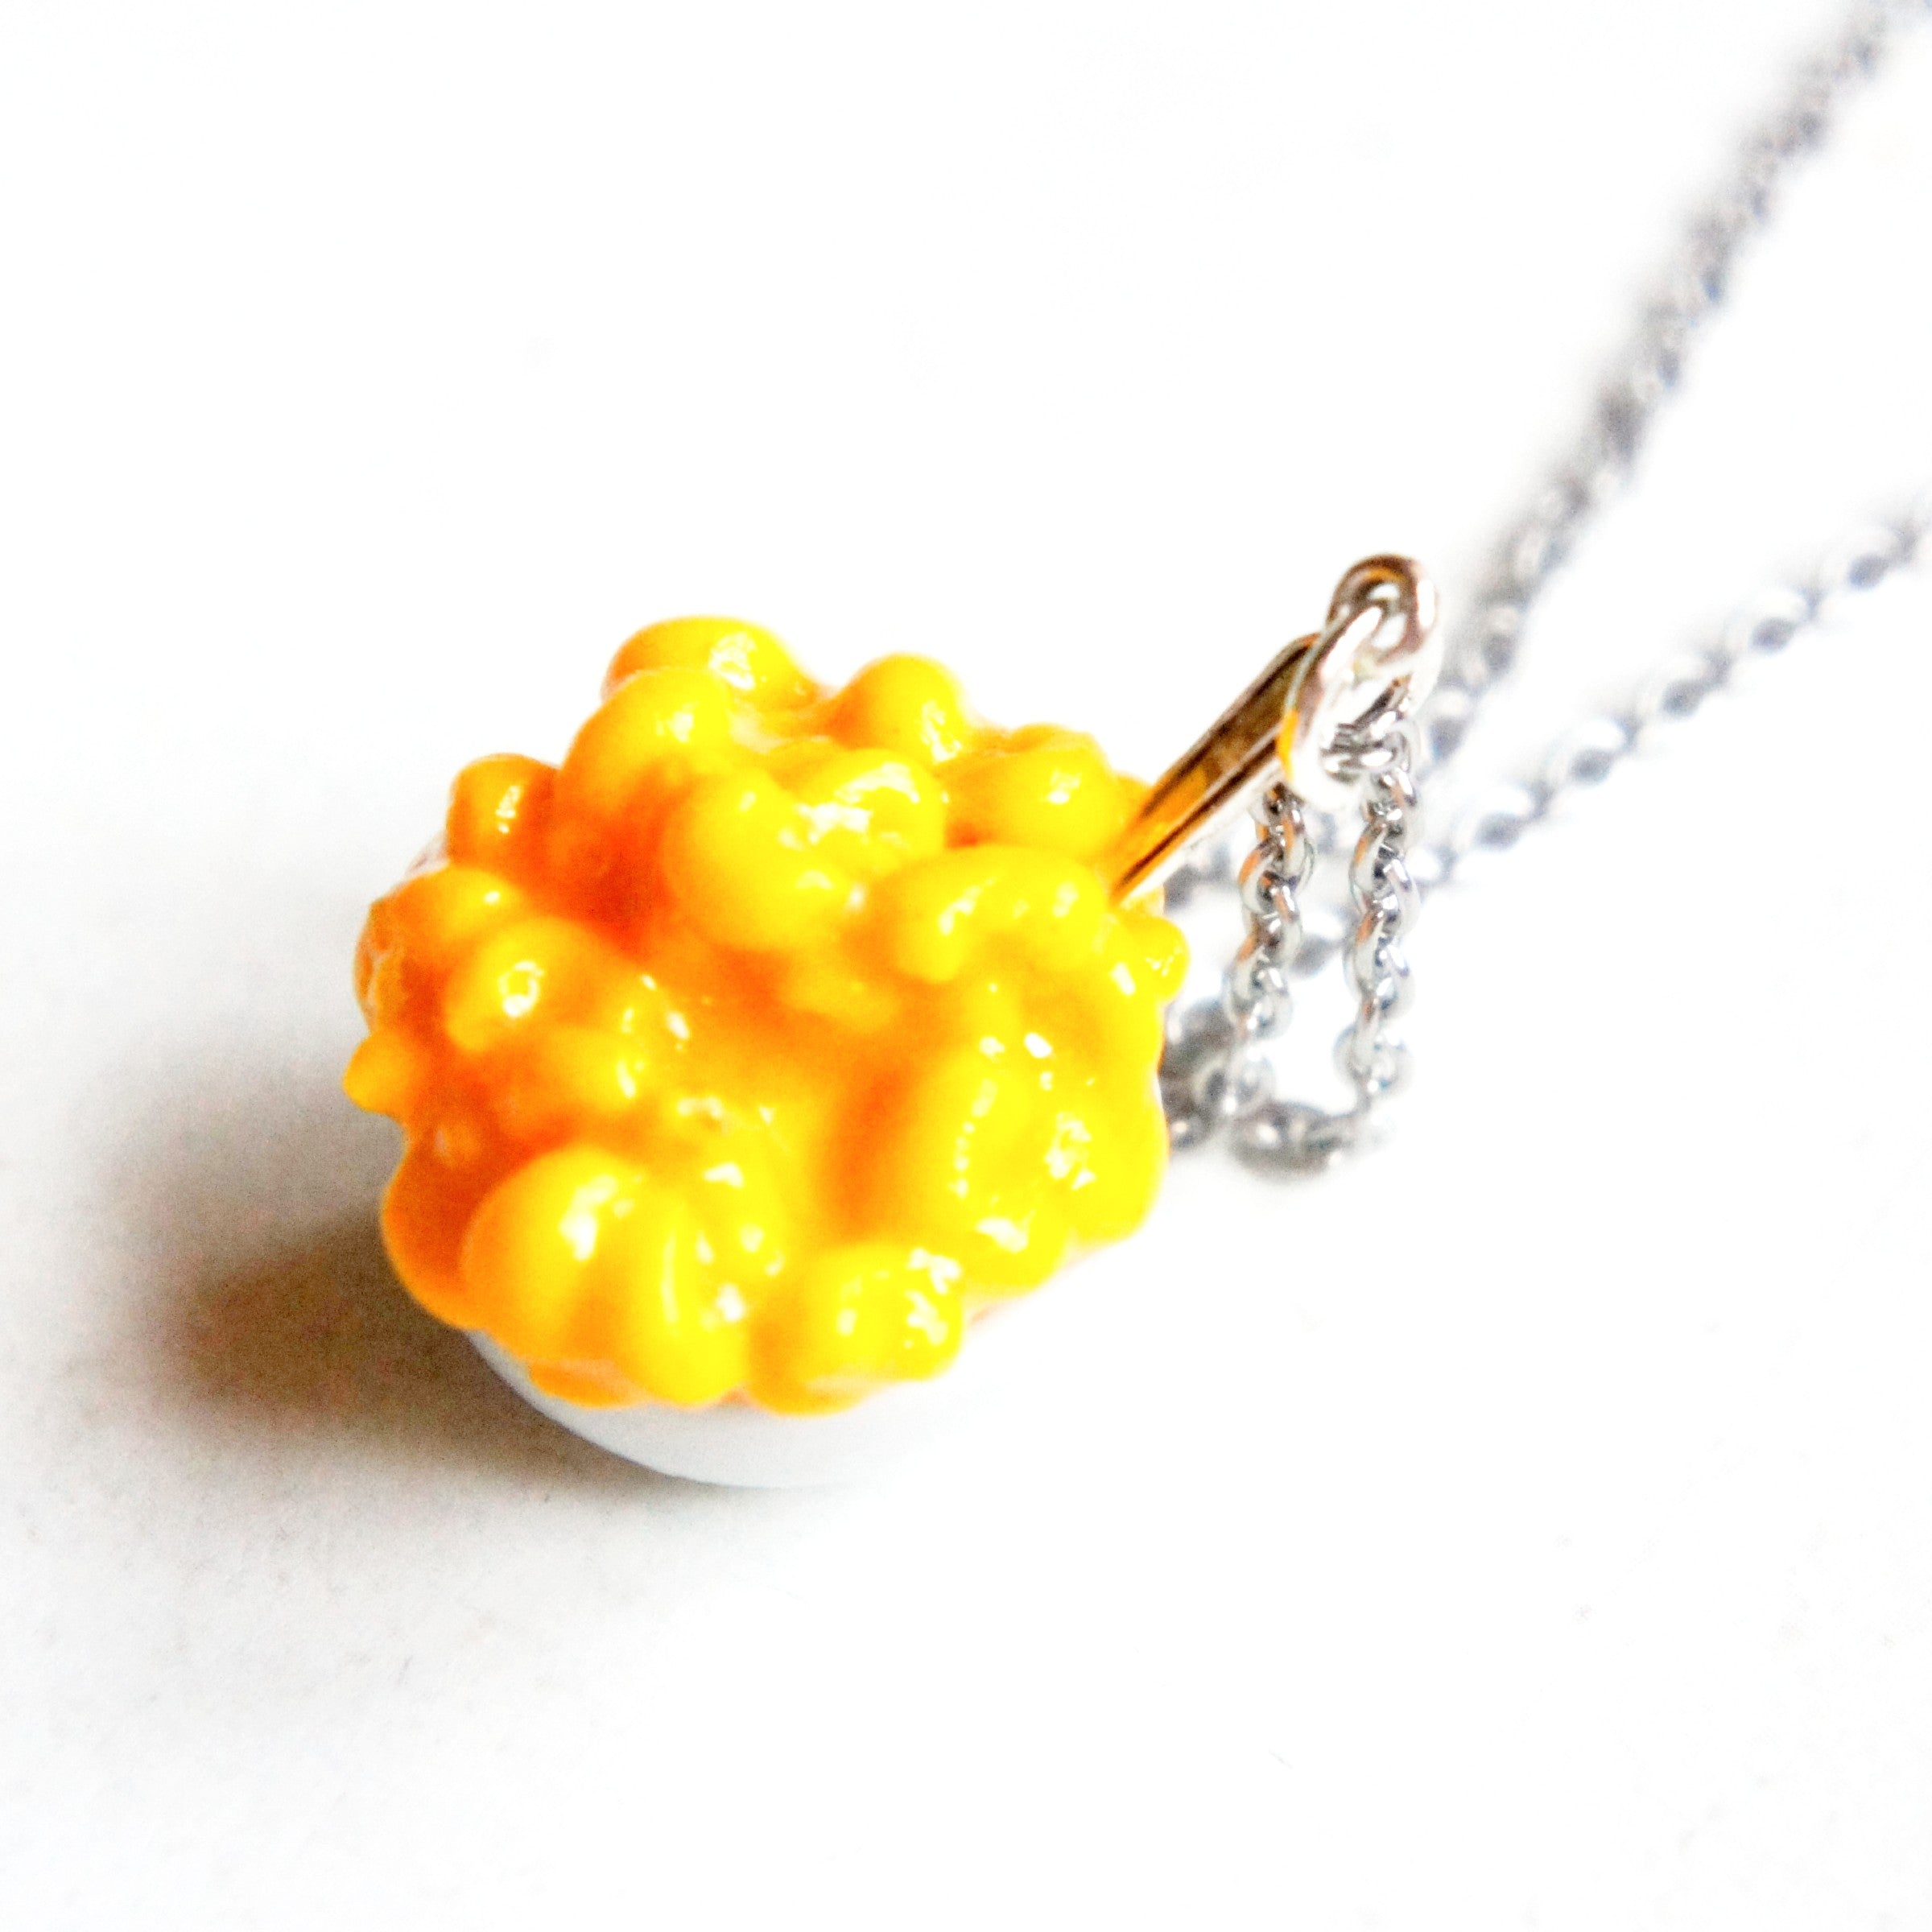 Mac and Cheese Necklace - Jillicious charms and accessories